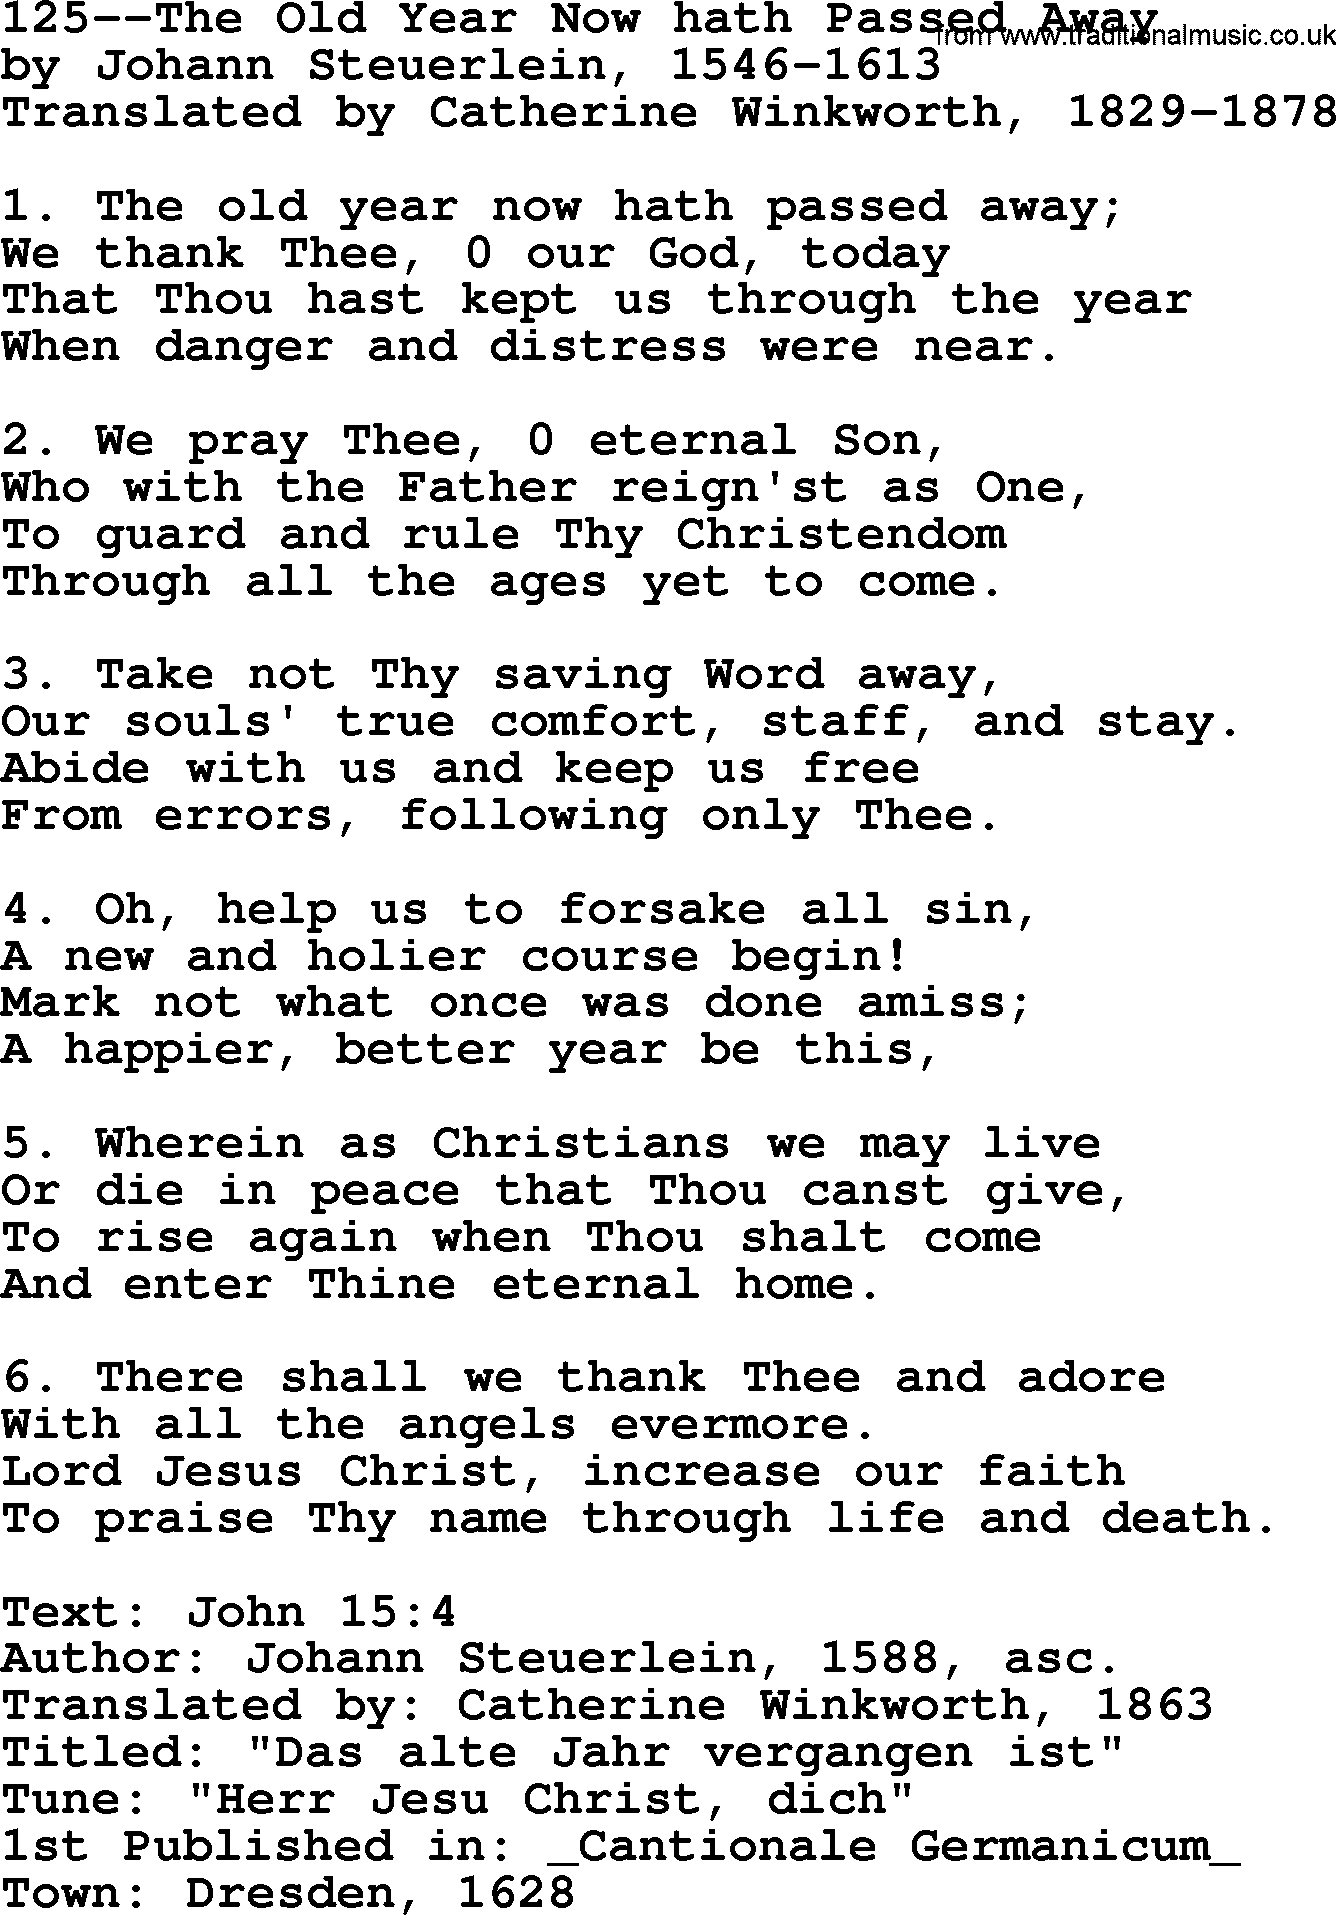 Lutheran Hymn: 125--The Old Year Now hath Passed Away.txt lyrics with PDF